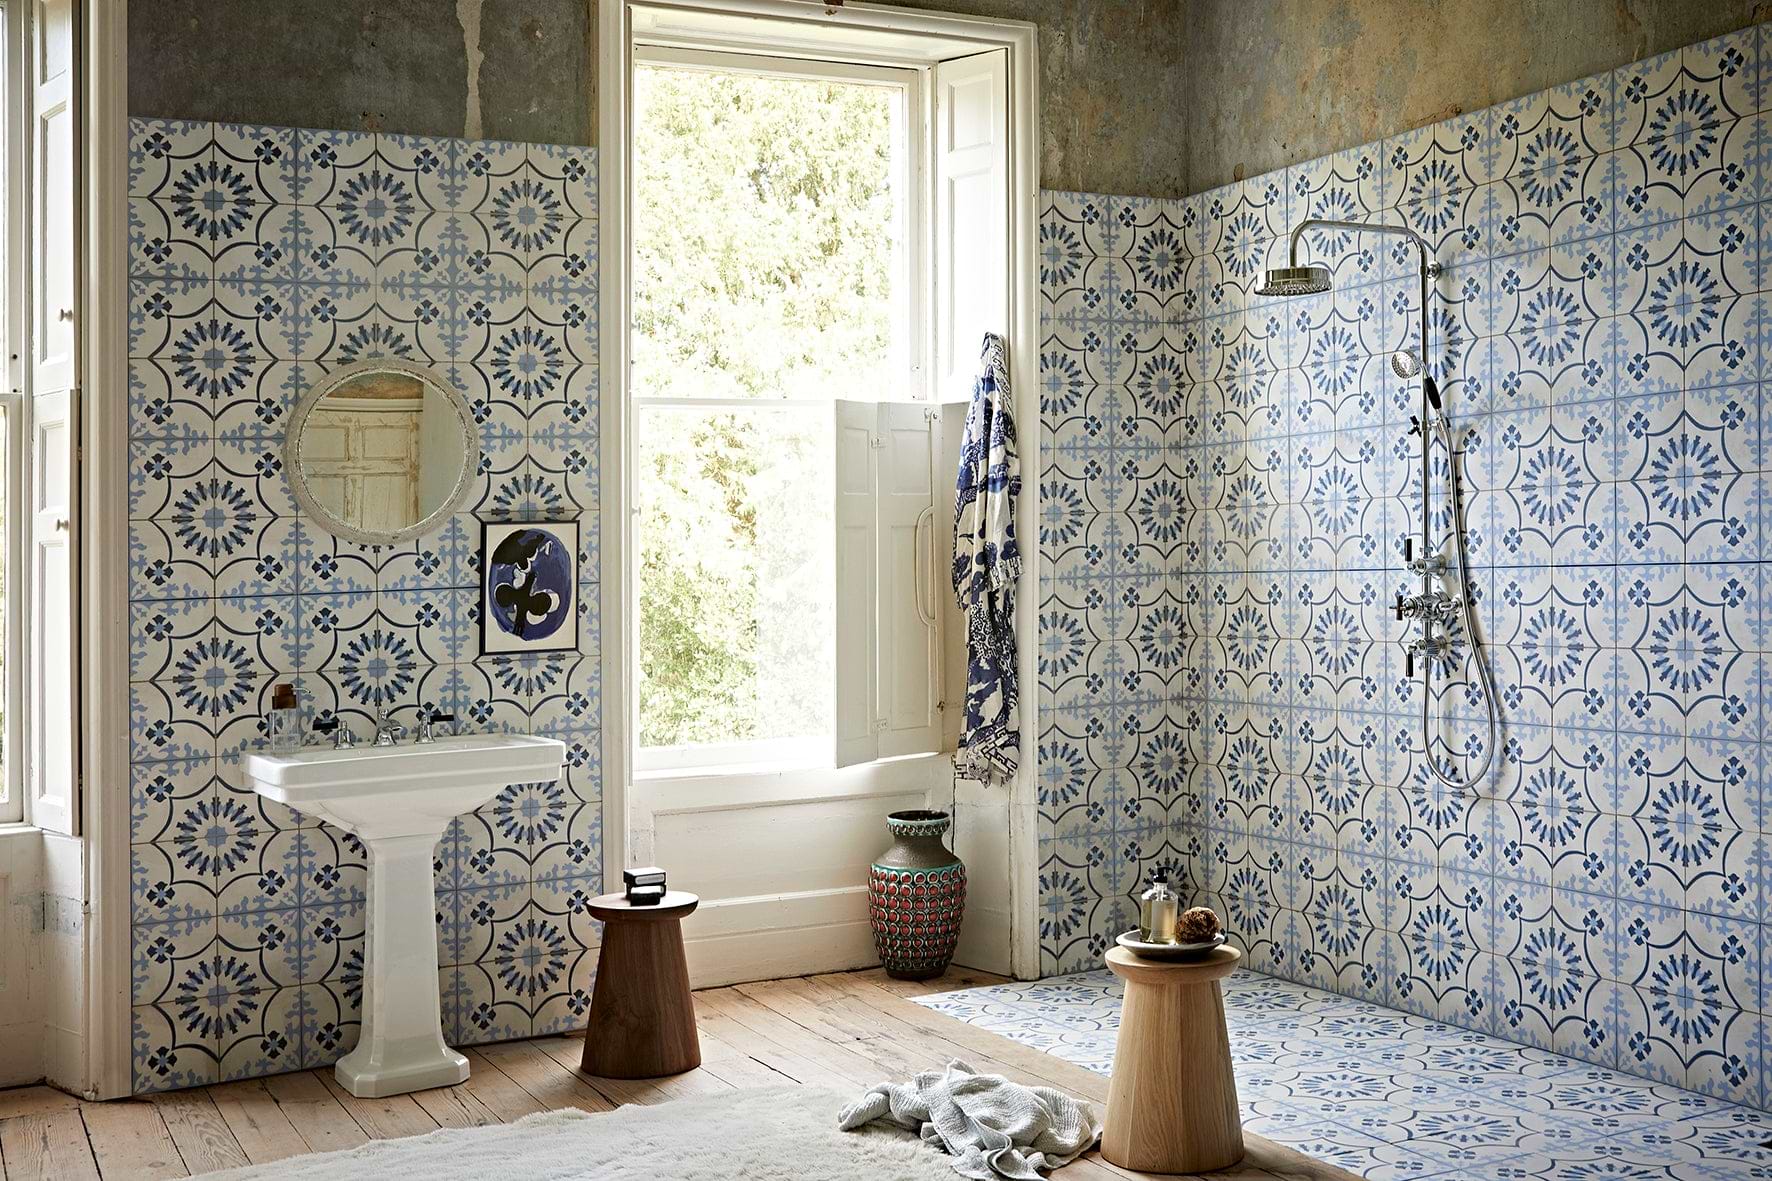 Bert & May Blue Bolonia Tiles stocked by Hyperion Tiles